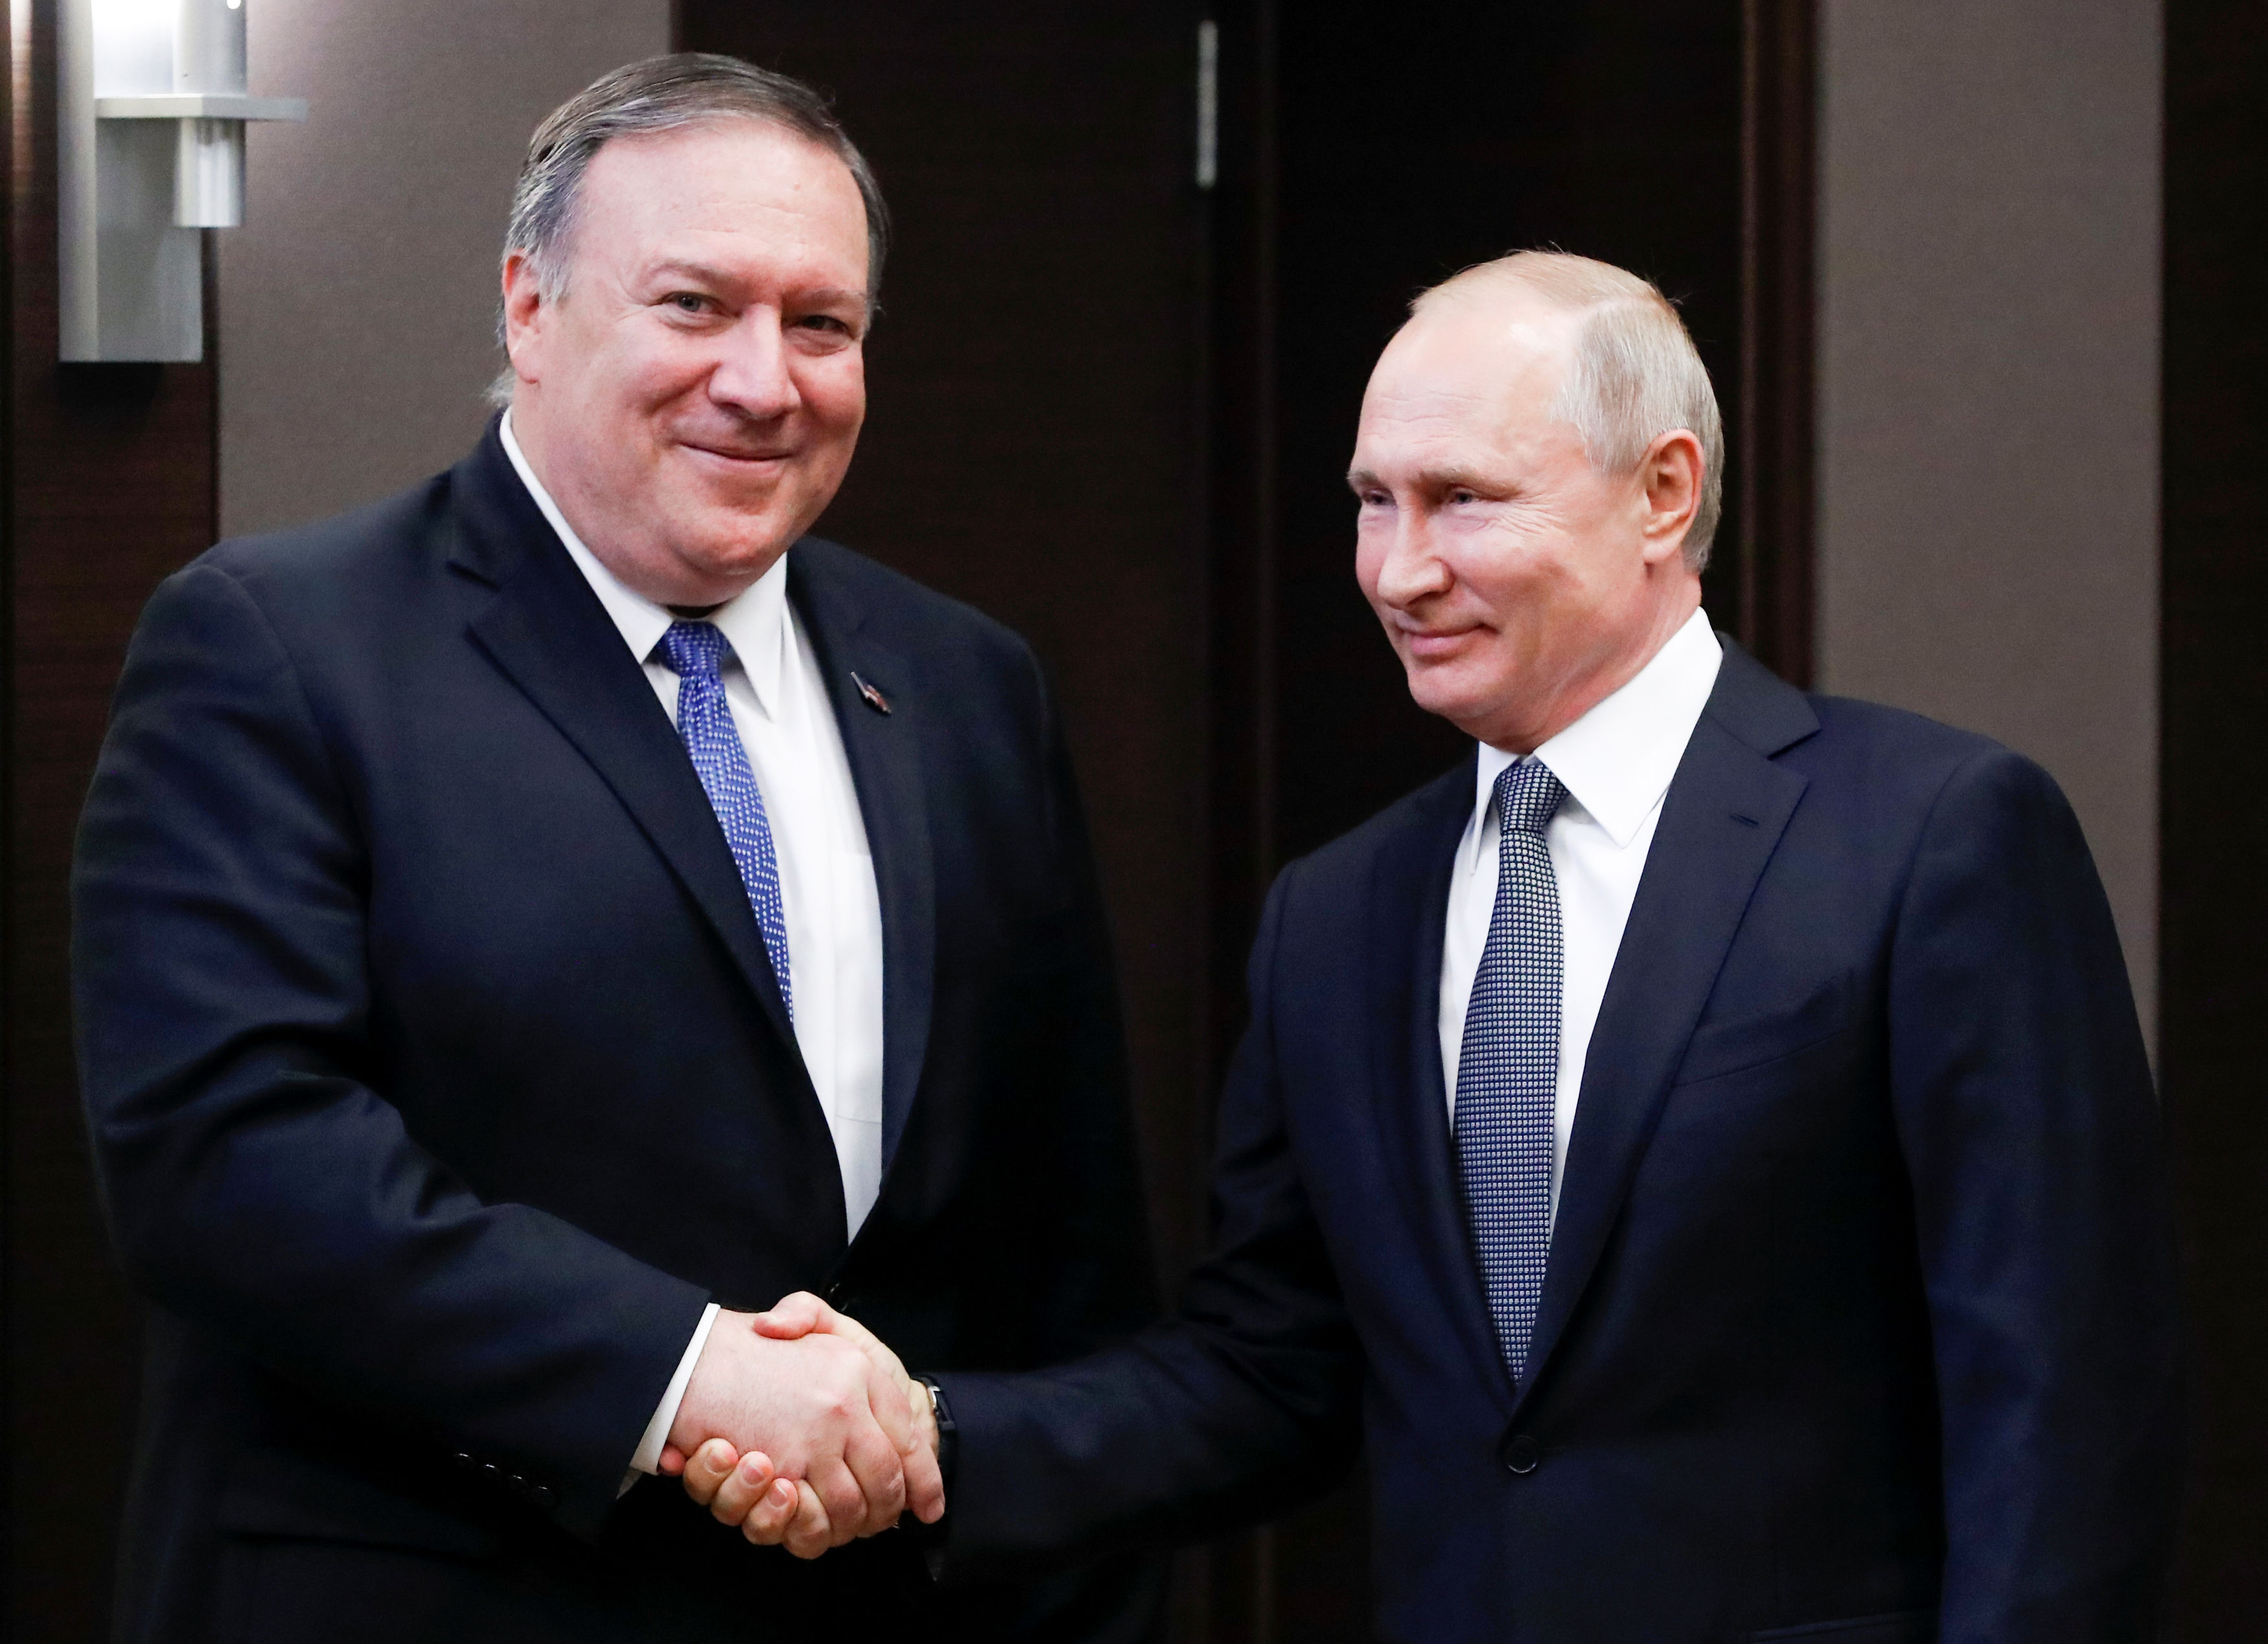 Russian President Vladimir Putin and U.S. Secretary of State Mike Pompeo pose for a photo prior to their talks in the Black Sea resort city of Sochi